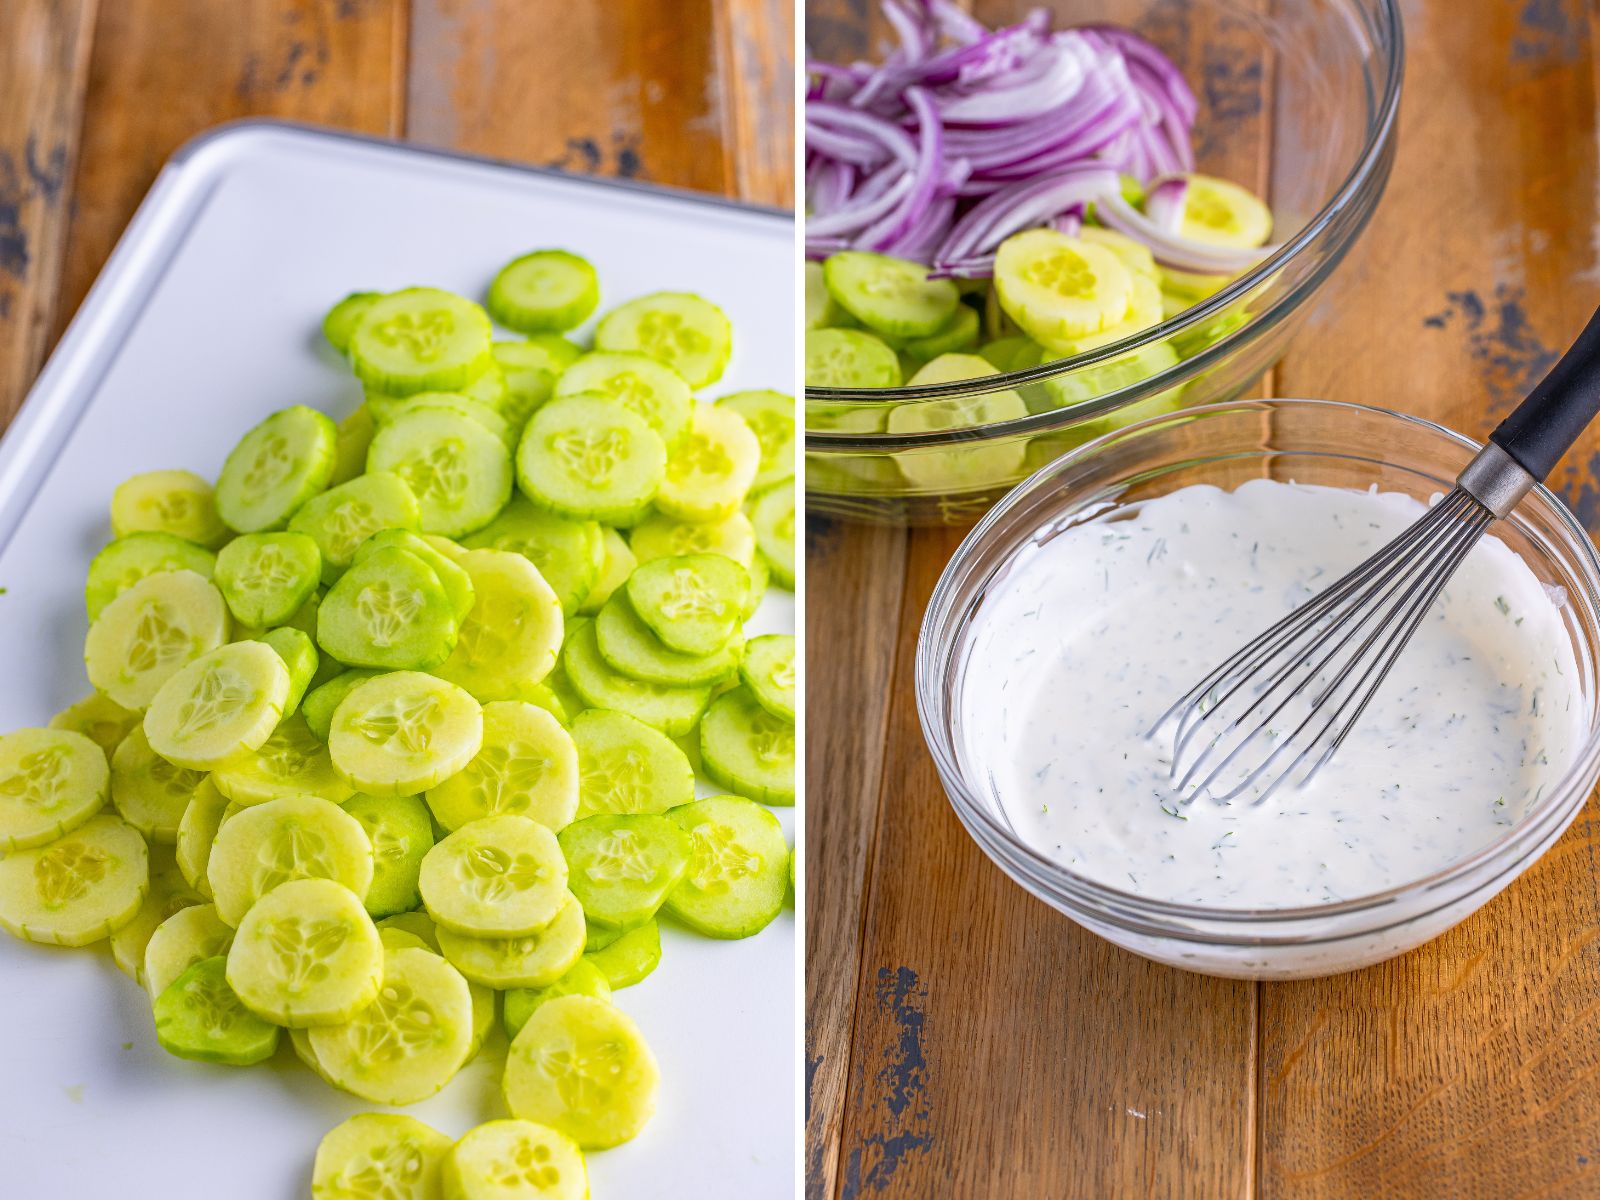 A whisk in a bowl of dressing and sliced cucumbers on a cutting board.